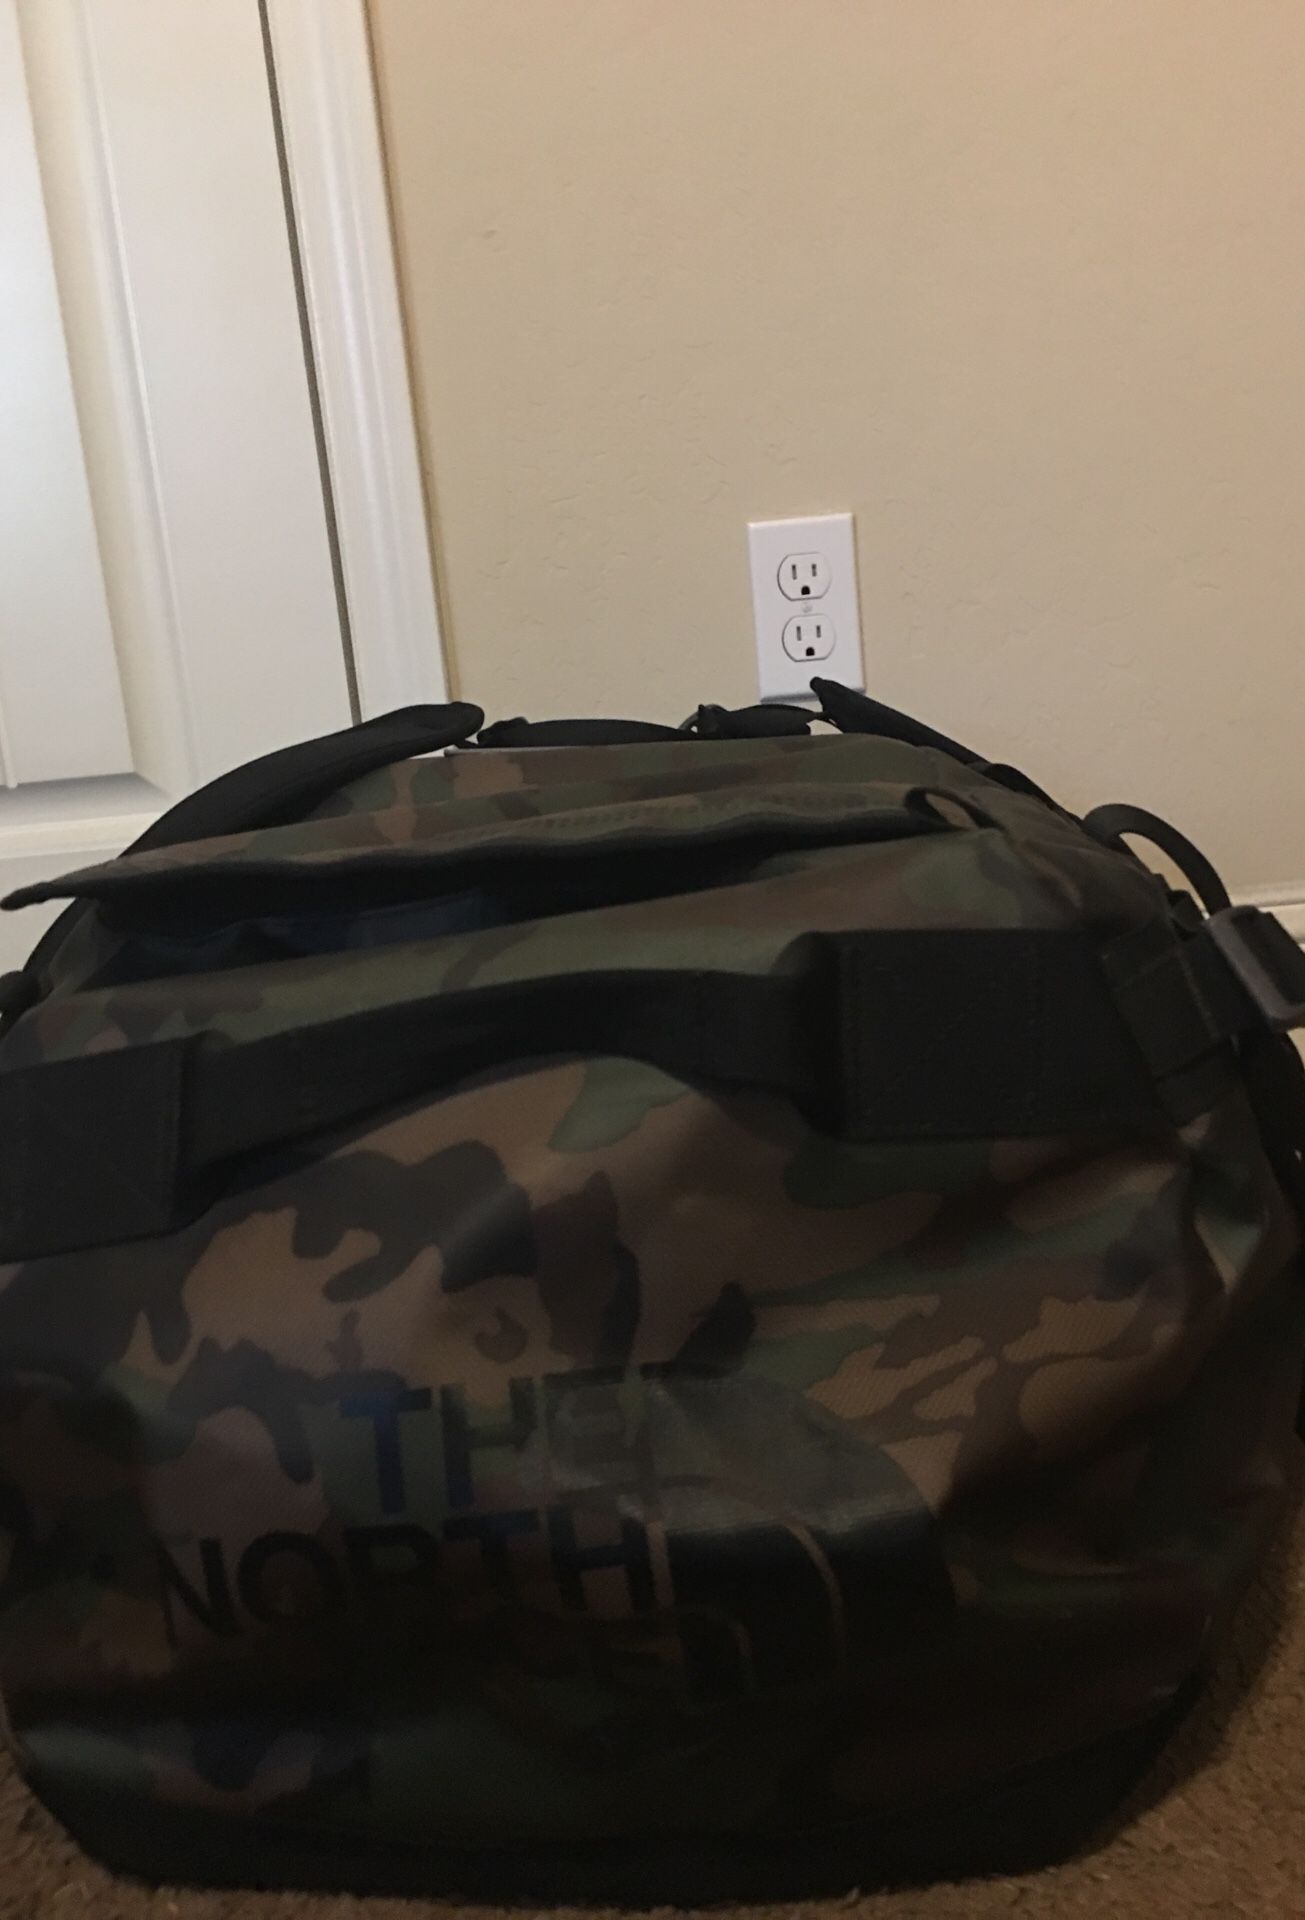 North Face duffle bad "large"